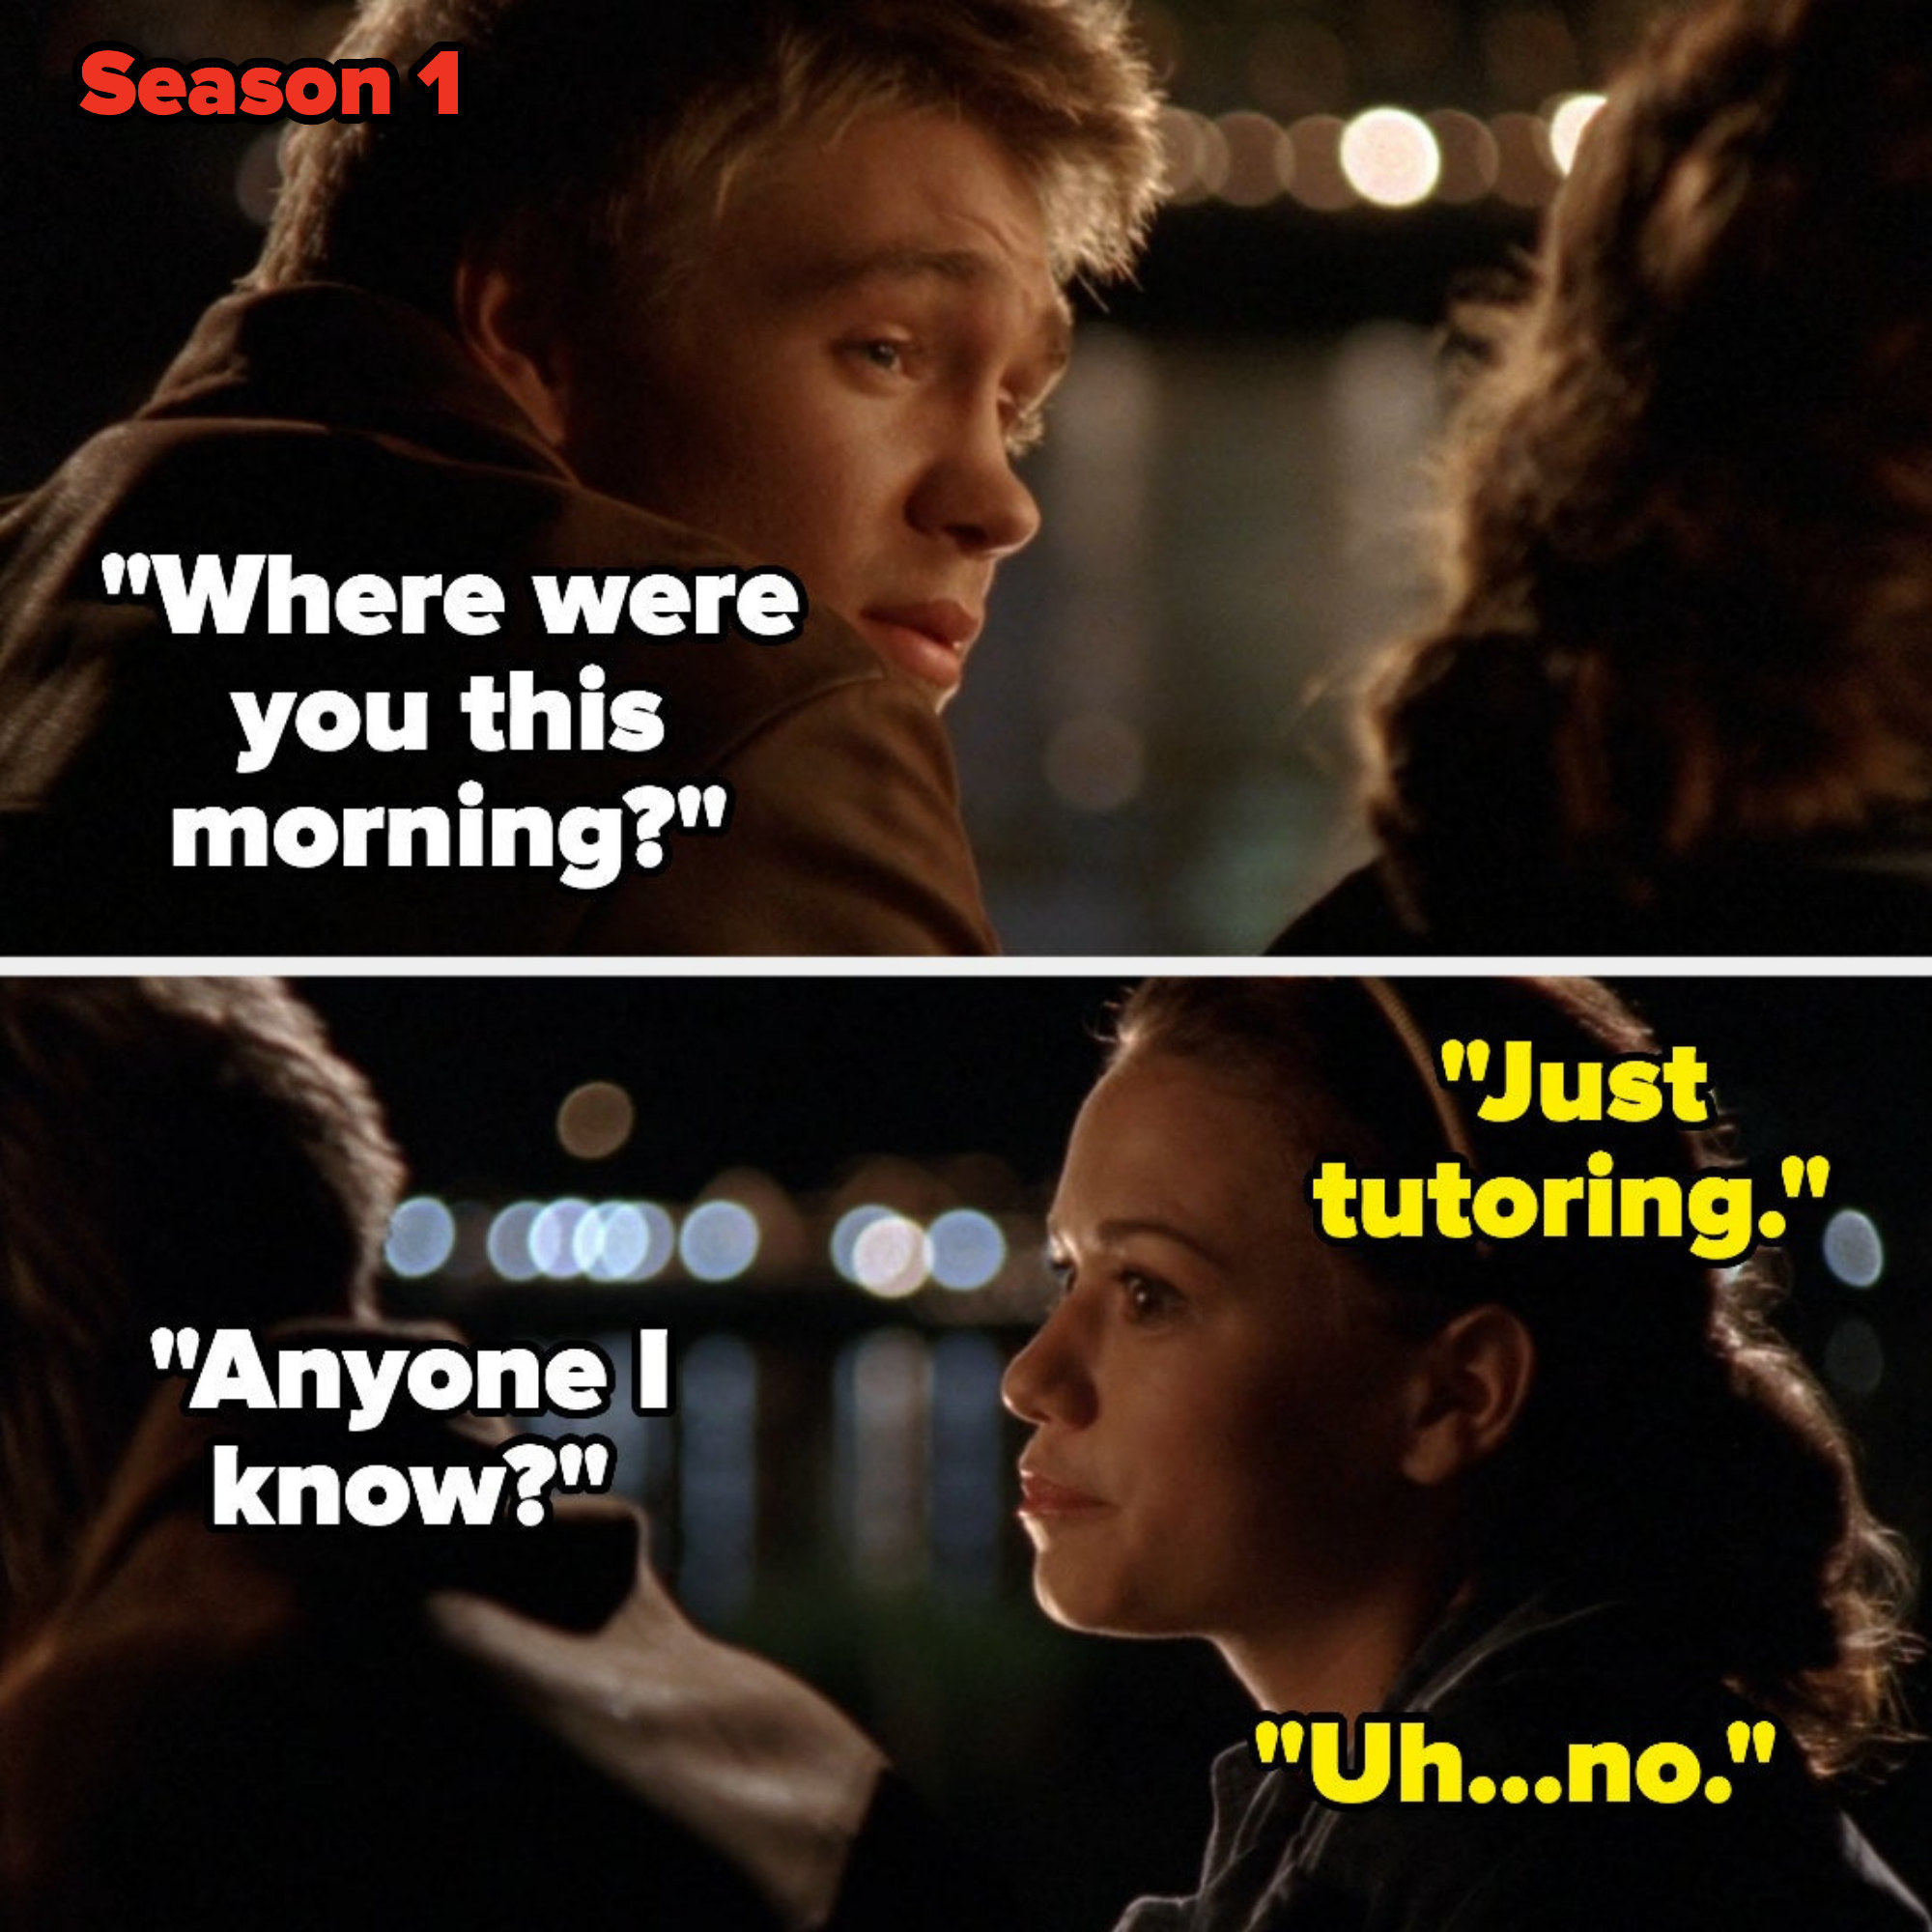 in season 1, lucas asks where haley was, and she says she was tutoring someone he doesn&#x27;t know